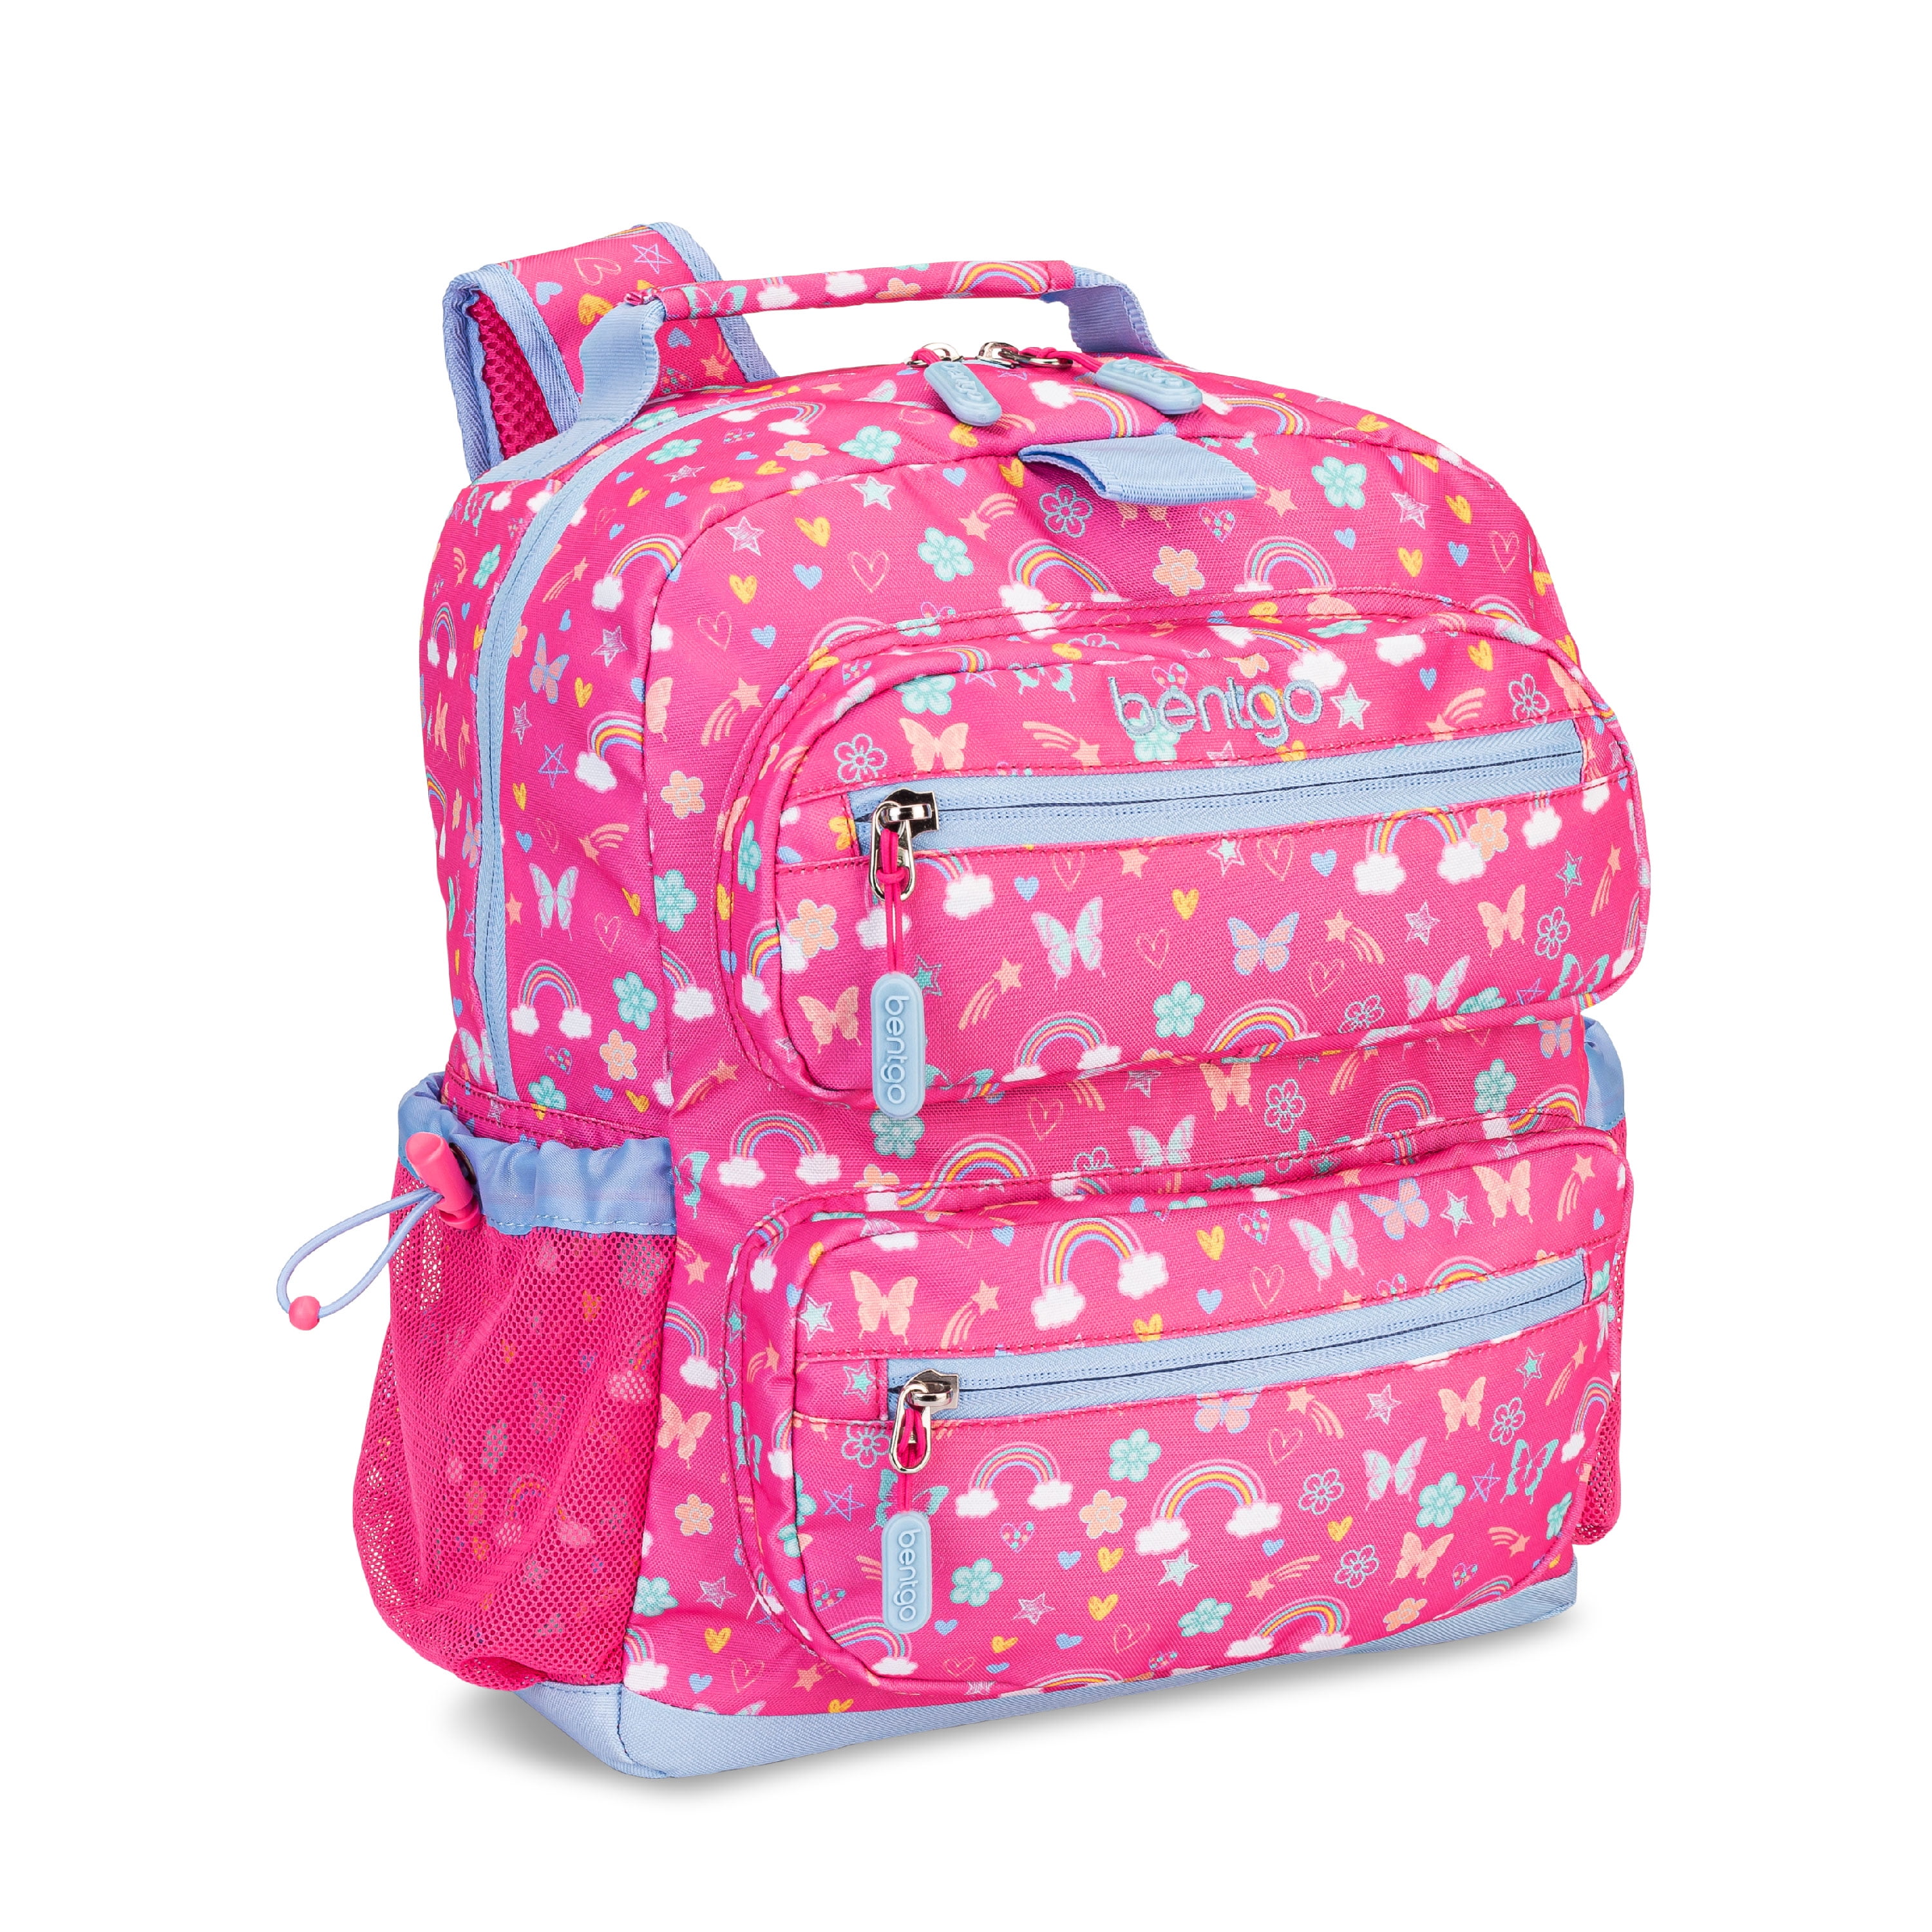 Bentgo Kids Backpack - Lightweight 14” Backpack in Unique Prints for School, Travel, & Daycare - Roomy Interior, Durable & Water-Resistant Fabric